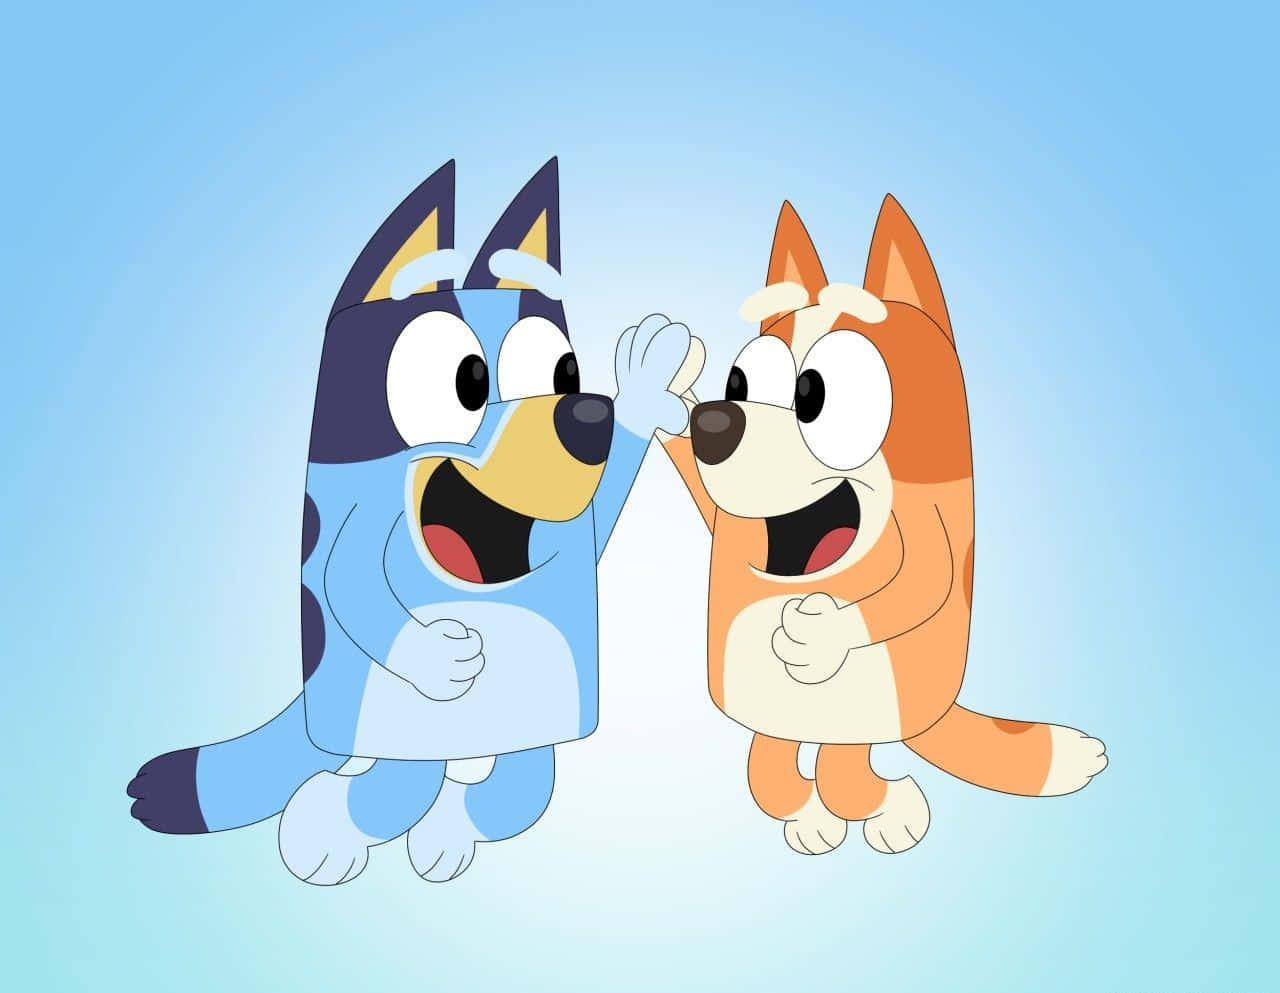 Two Cartoon Characters Are Holding Hands And Giving Each Other High Fives